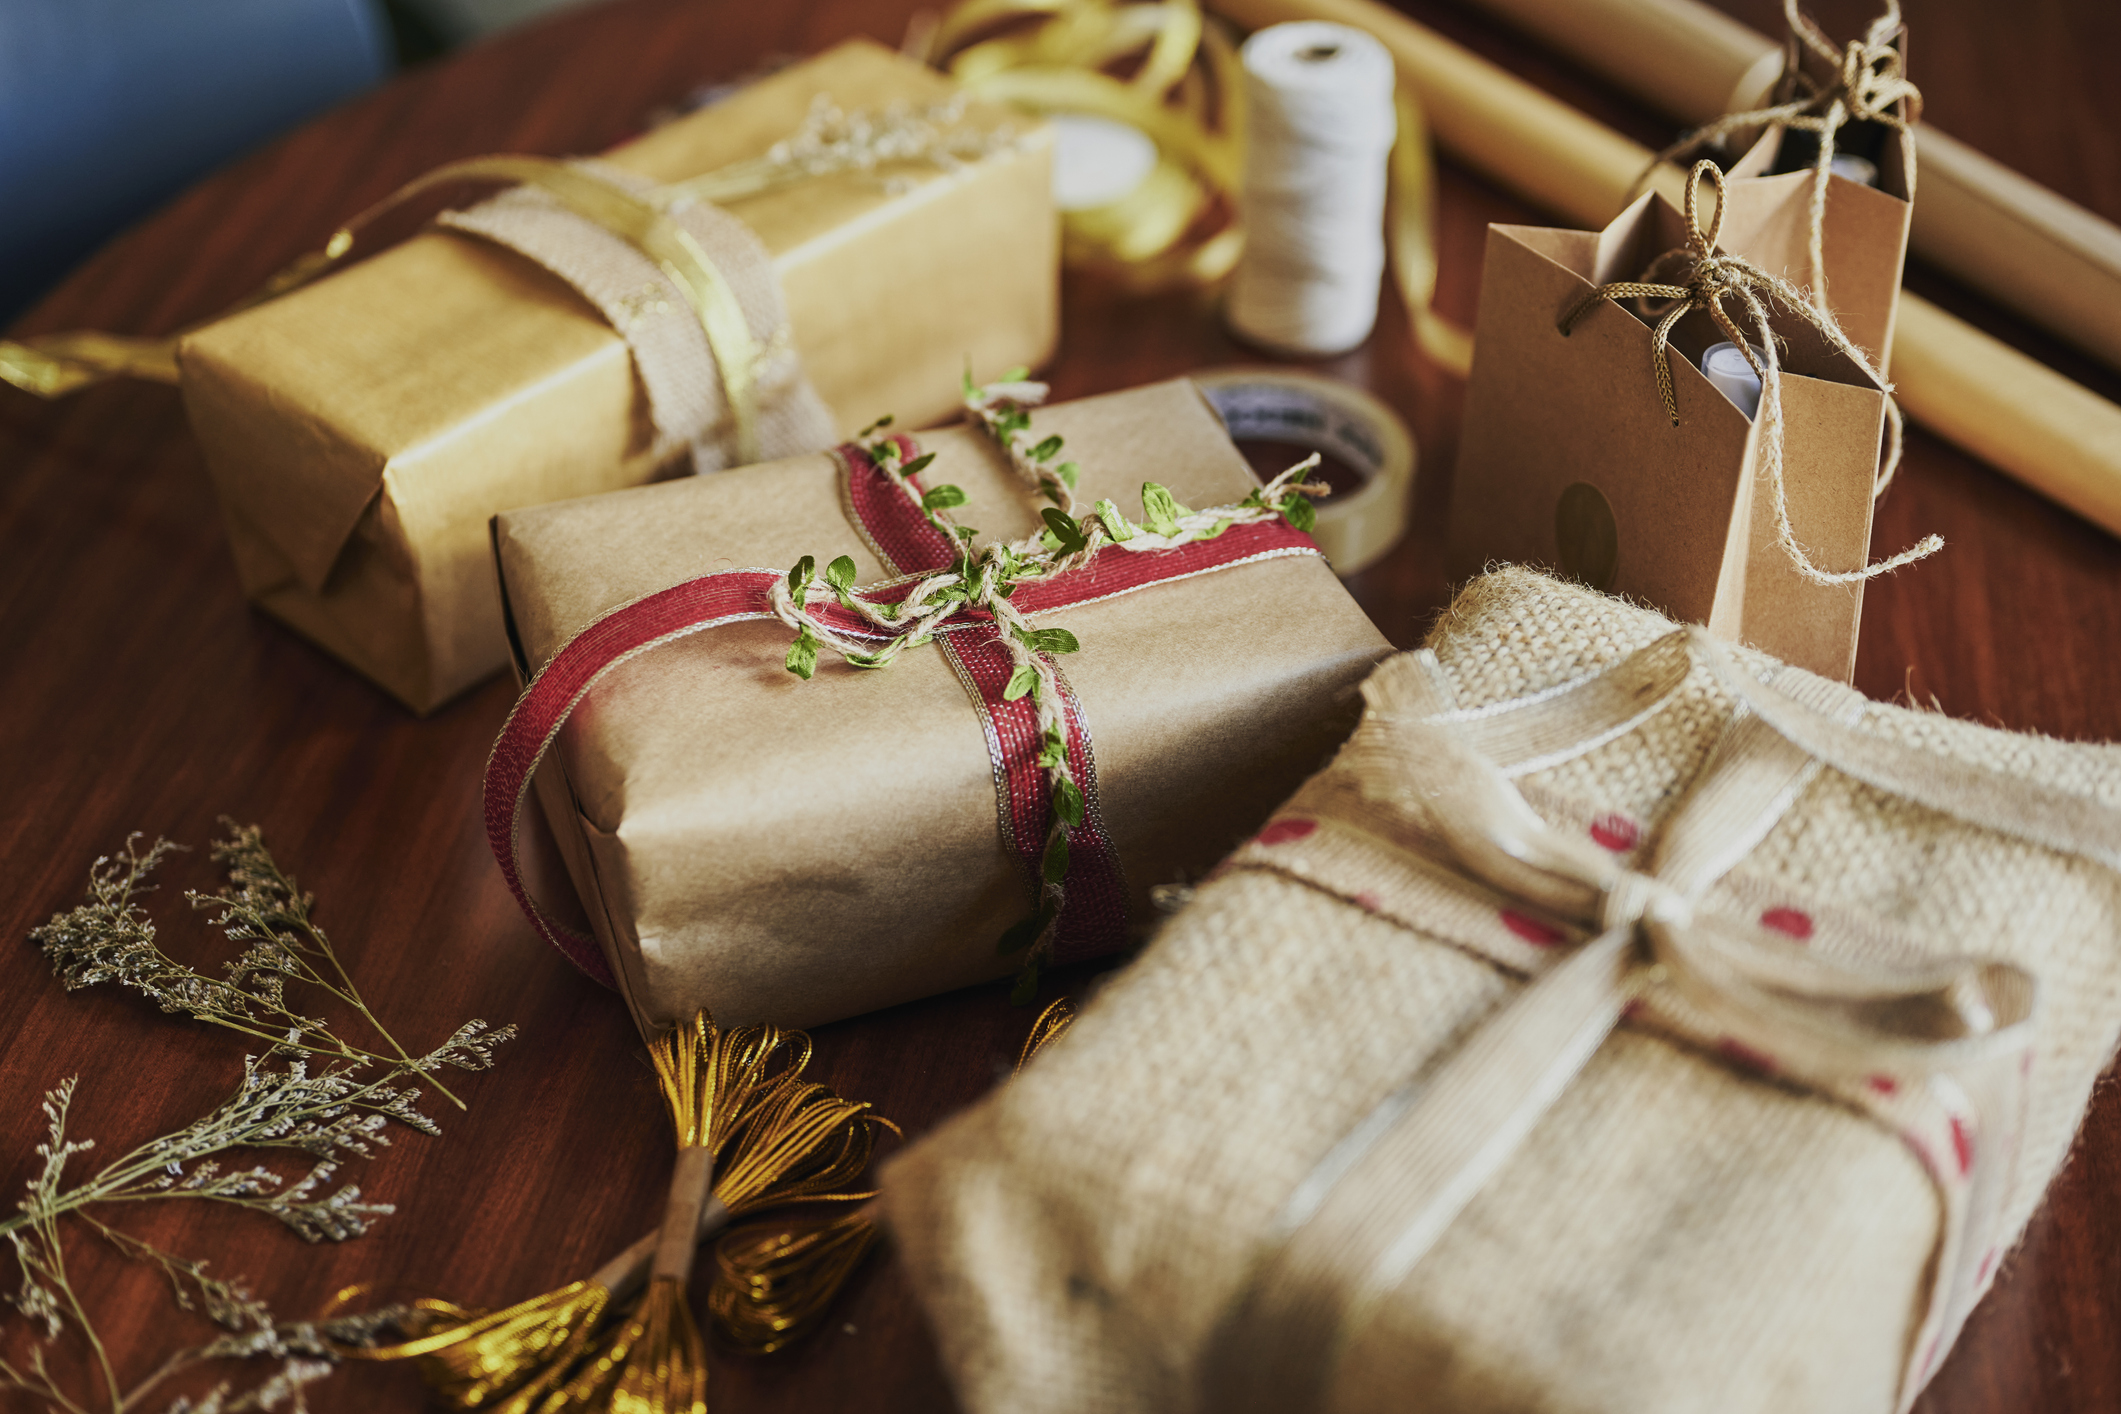 Top 13 Sustainable Corporate Gifts Ideas to Sleigh the Season